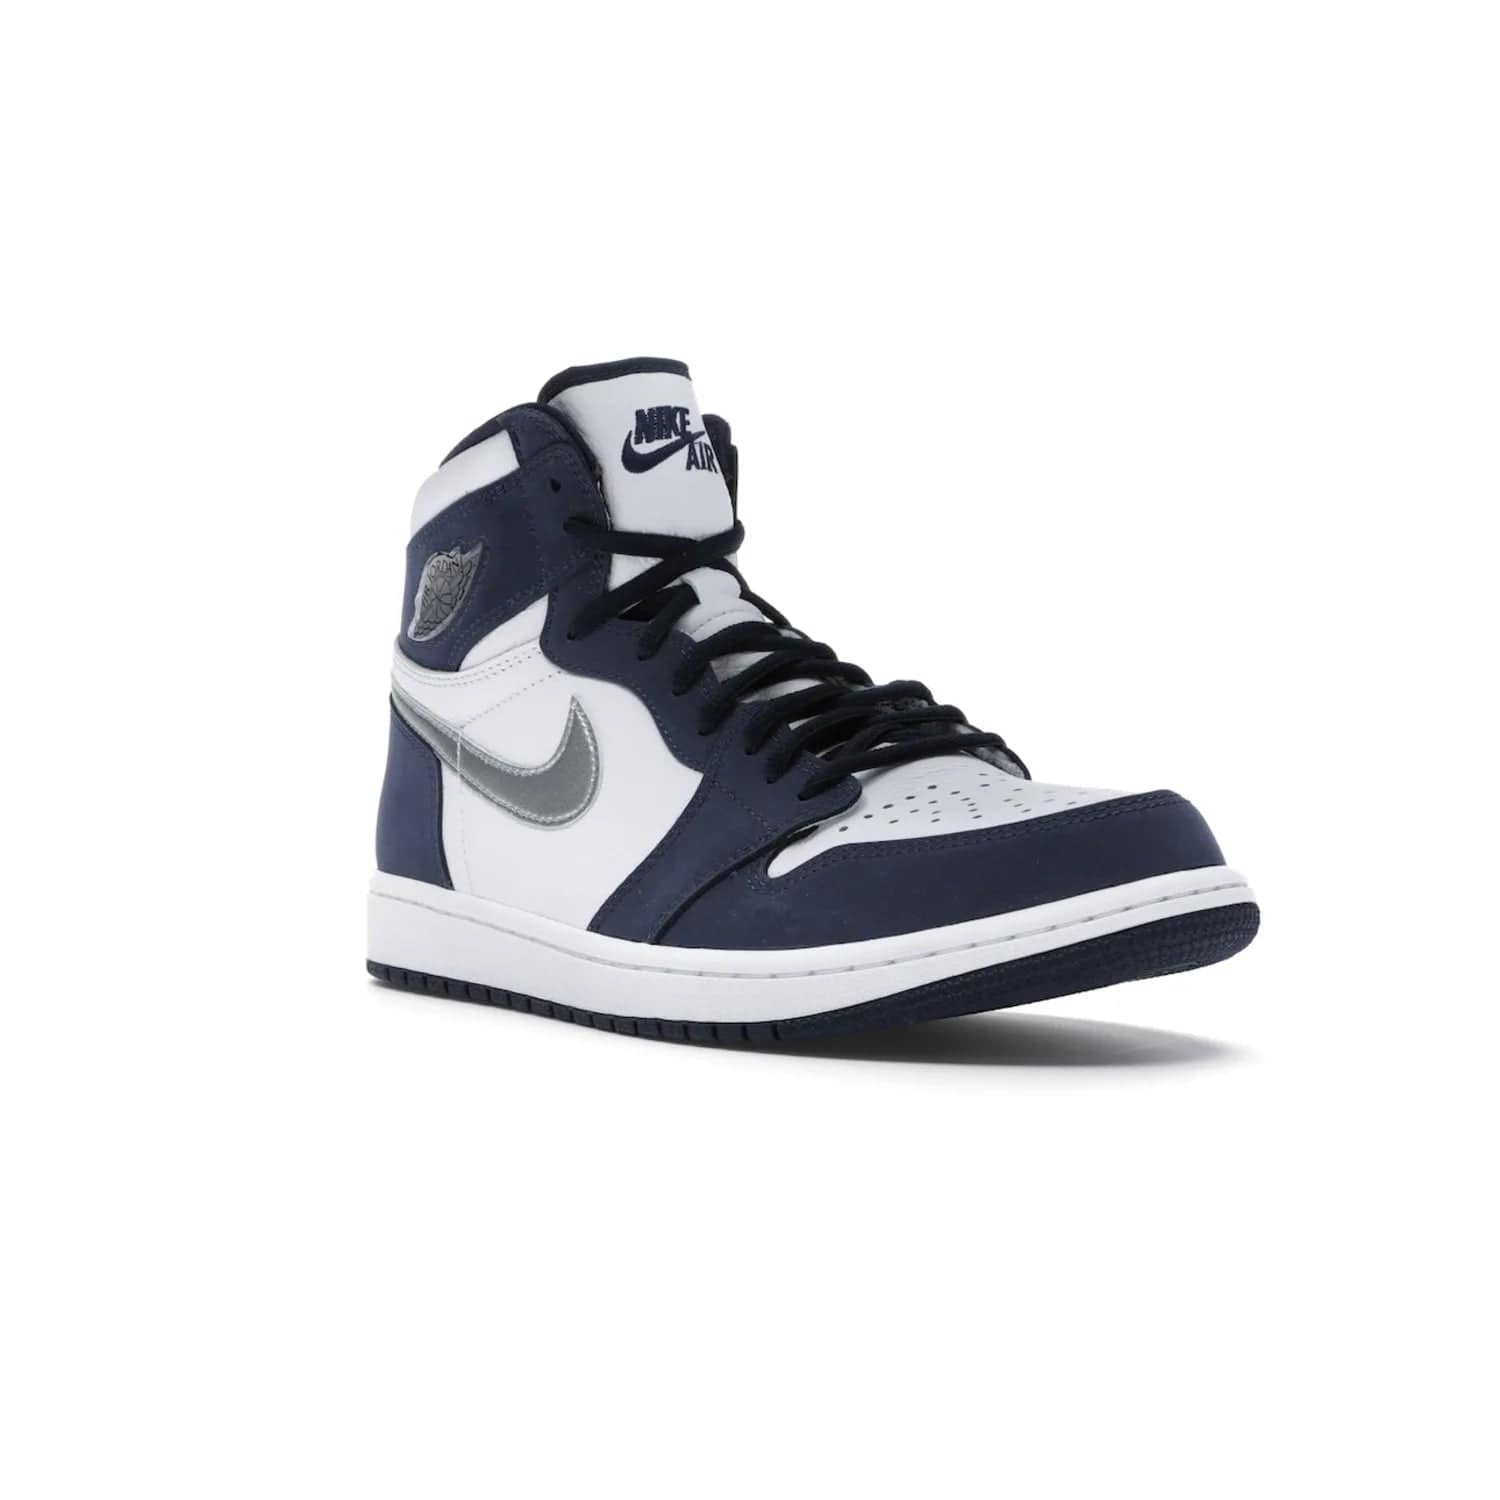 Jordan 1 Retro High COJP Midnight Navy (2020) - Image 6 - Only at www.BallersClubKickz.com - Air Jordan 1 Retro High COJP Midnight Navy - Iconic silhouette updated with a modern touch. Be ahead of the game with this timeless style. Get it now.